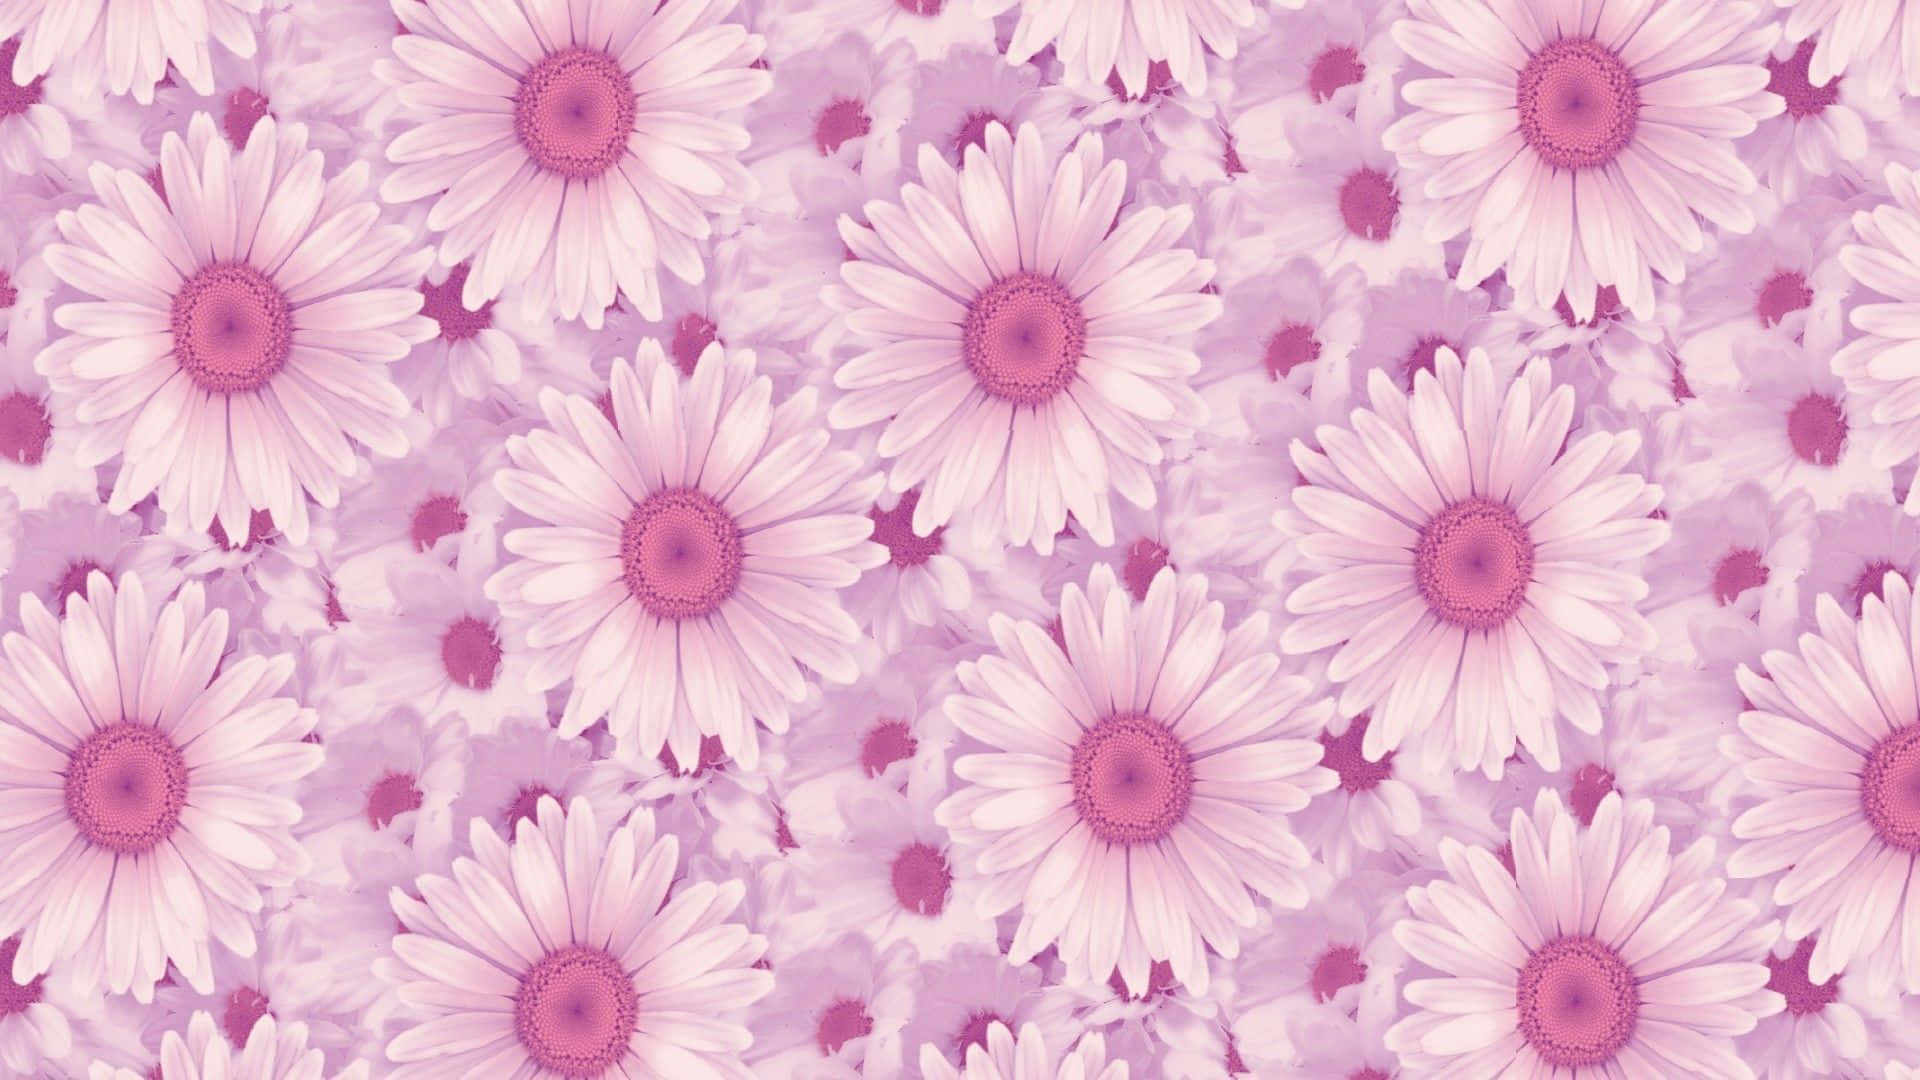 Beautiful Blooming Flowers on a Tumblr Background